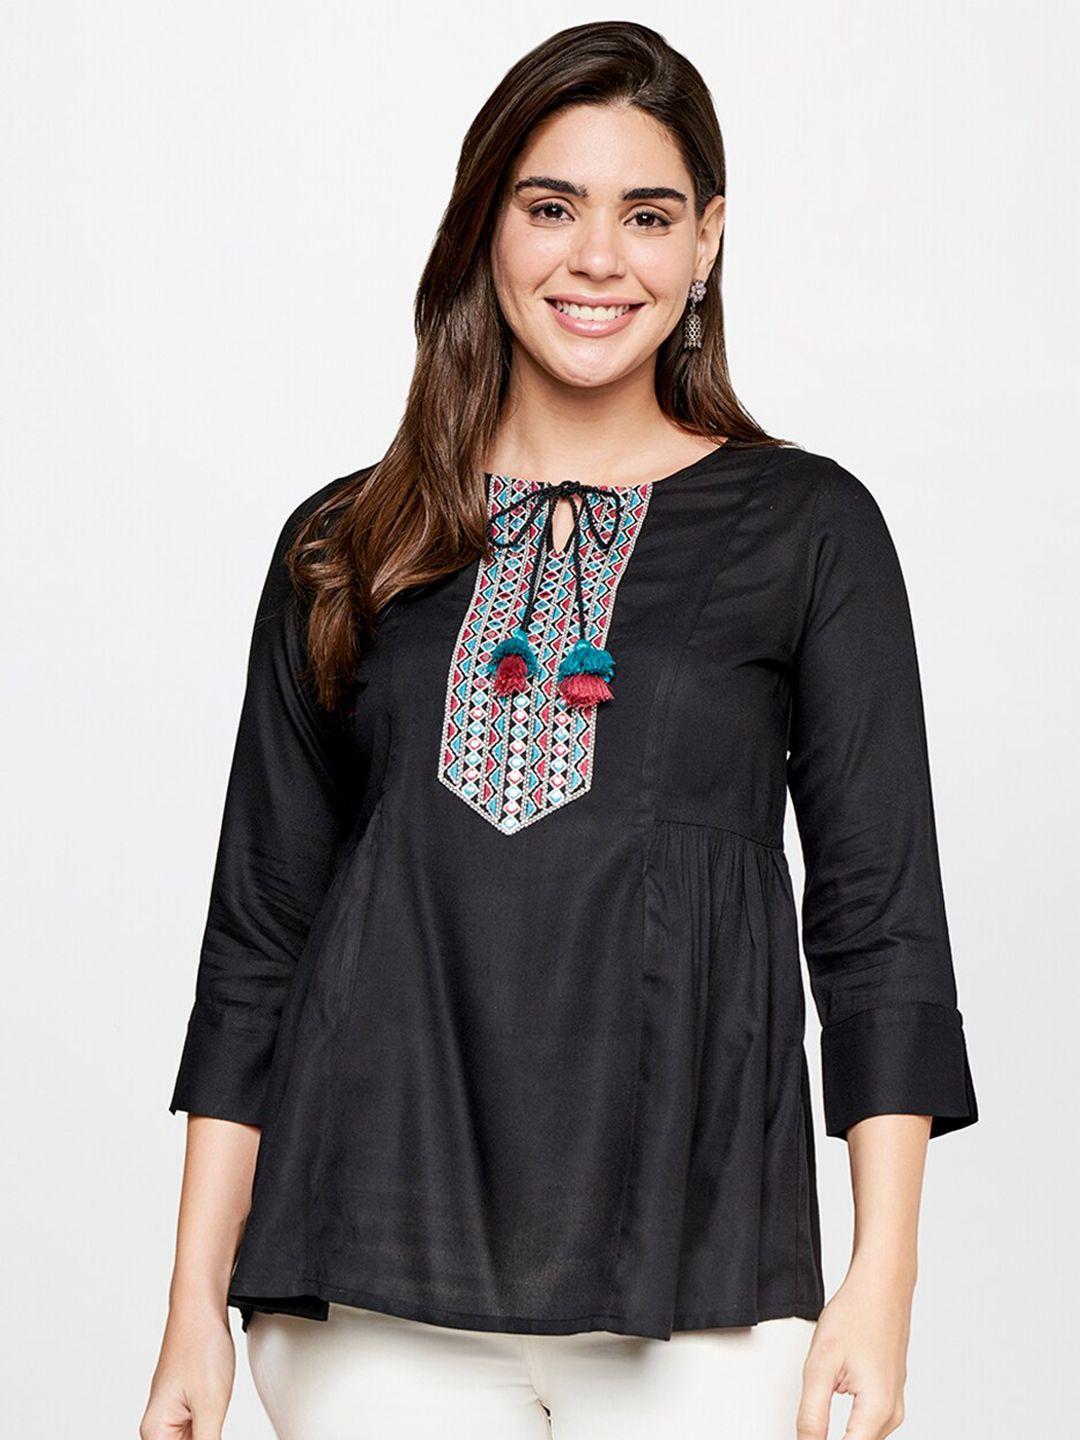 itse-tie-up-neck-three-quarter-sleeves-casual-top